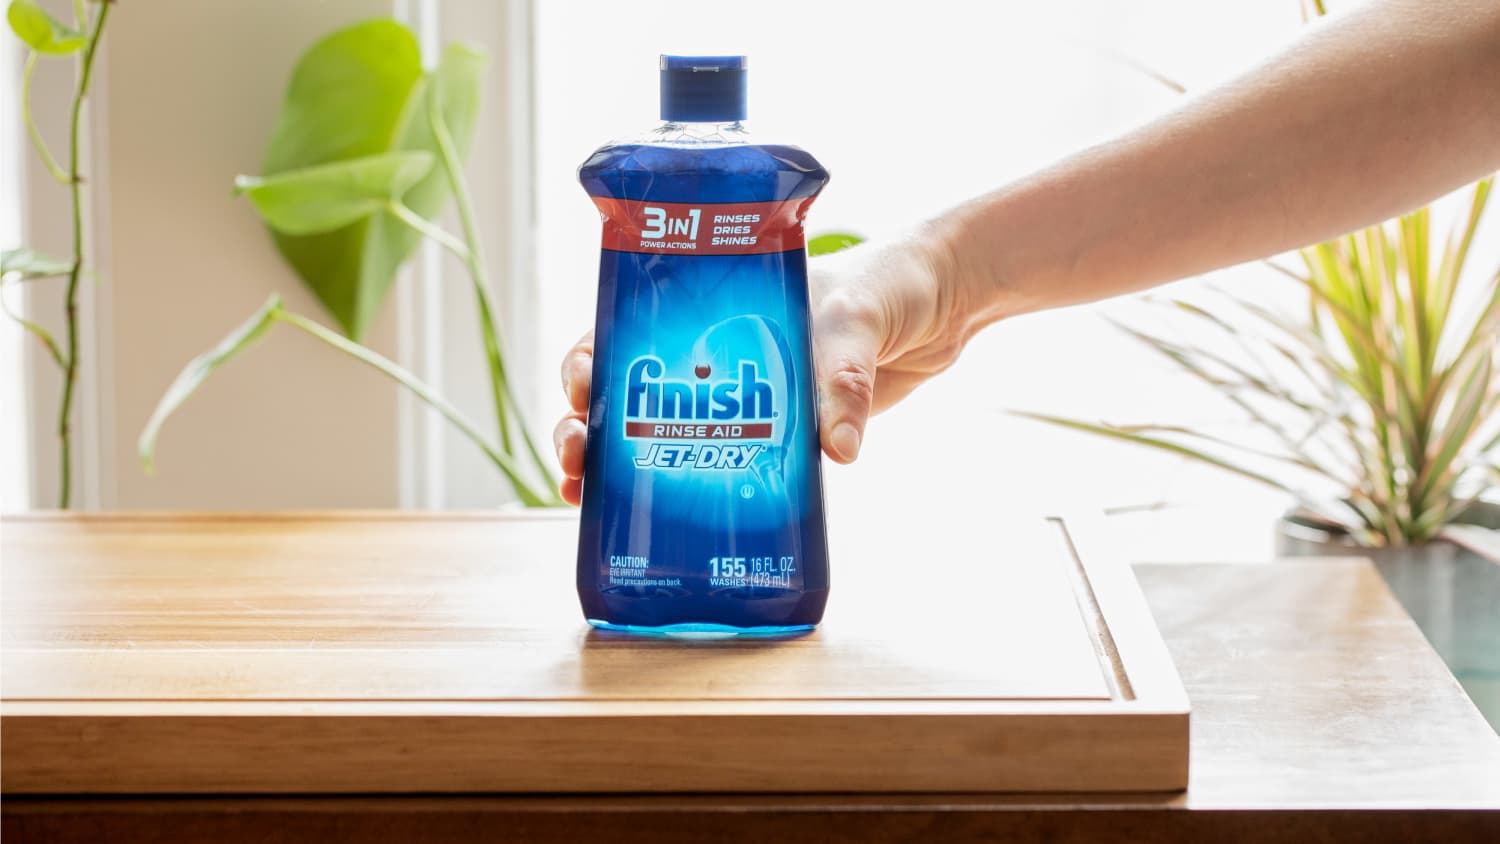 Finish Jet-Dry Rinse Aid-16oz. (155 Washes)-Rinses, Dries, & Shines